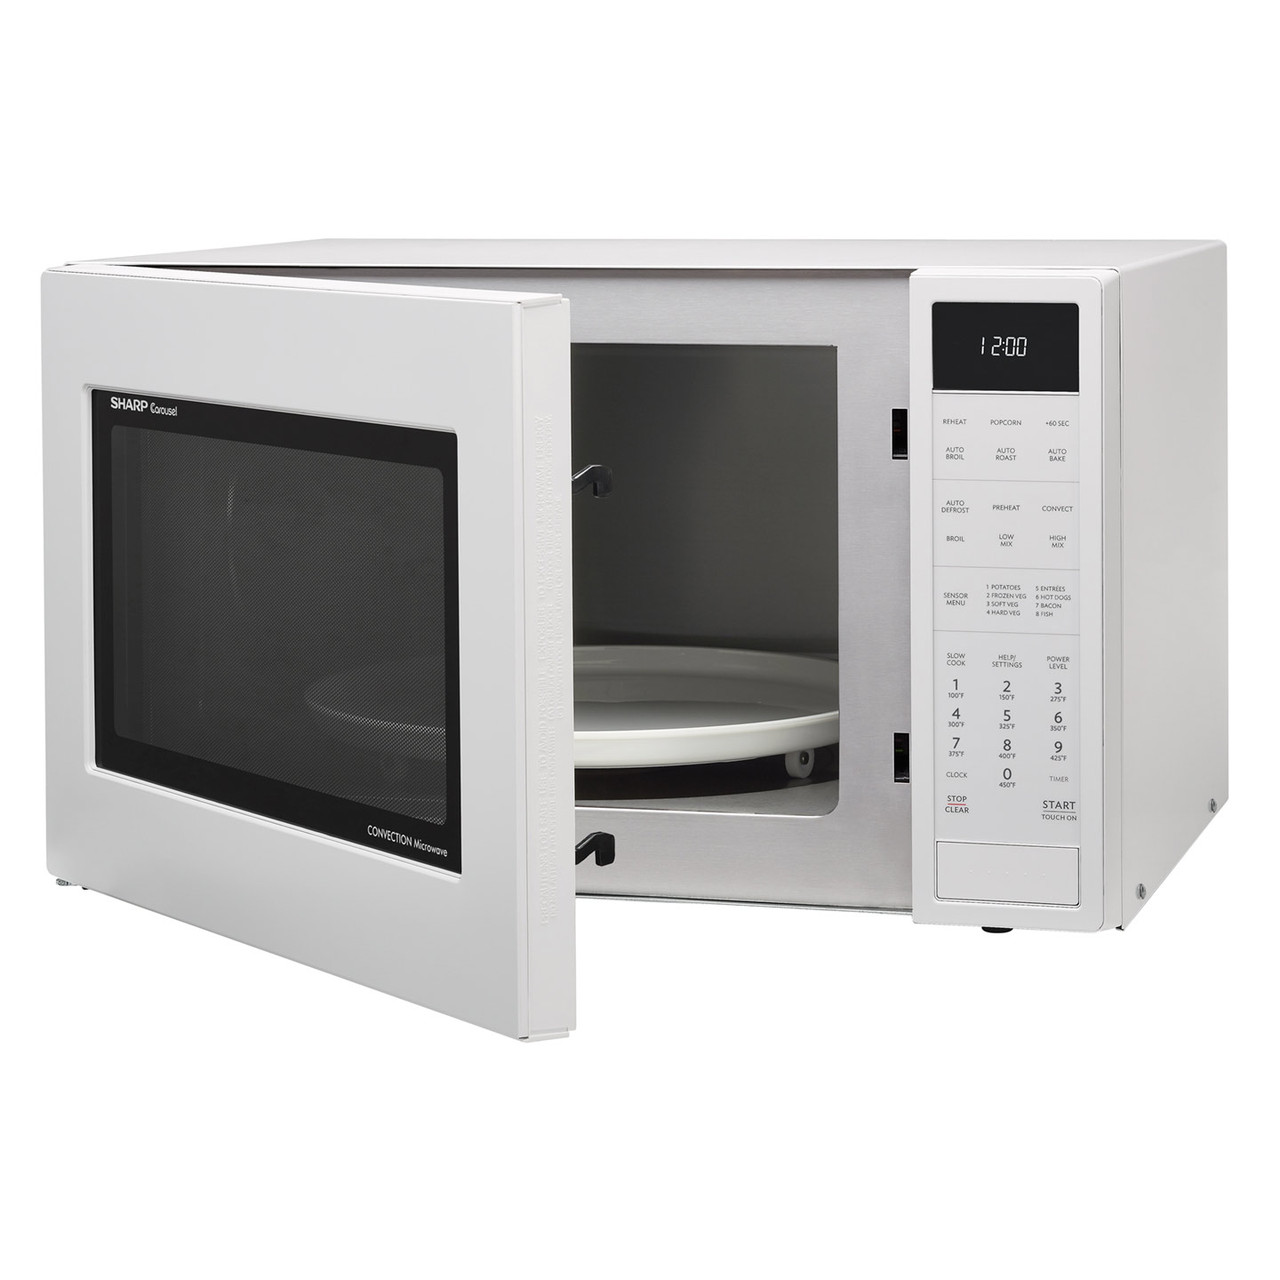 1.5 cu. ft. White Carousel Convection Microwave (SMC1585BW) – left angle view with door open